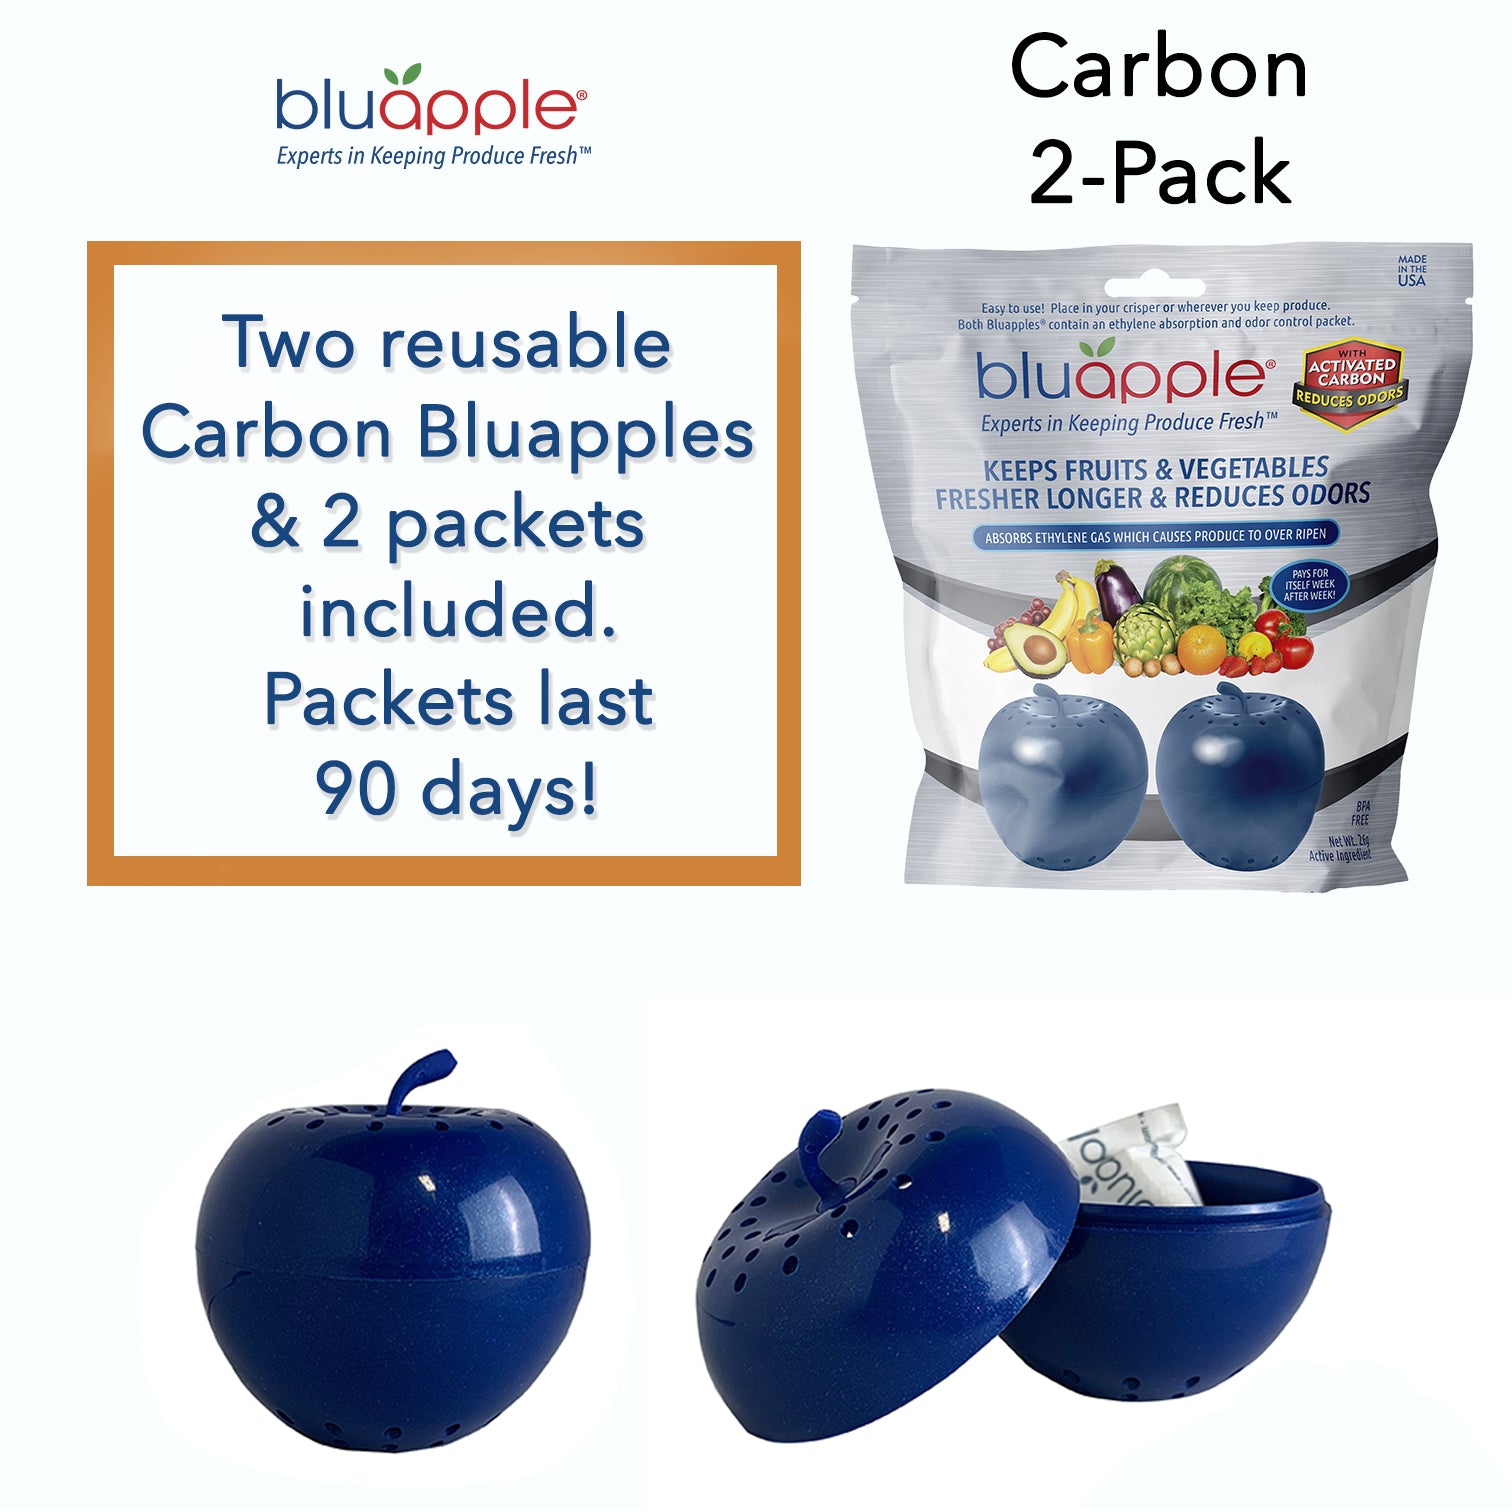 Bluapple 1 Year Carbon Refill Kit Includes 8 Packets For 2 Bluapples With  Carbon - For 1 Full Year To Keep Produce Fresh Longer And Help Absorb